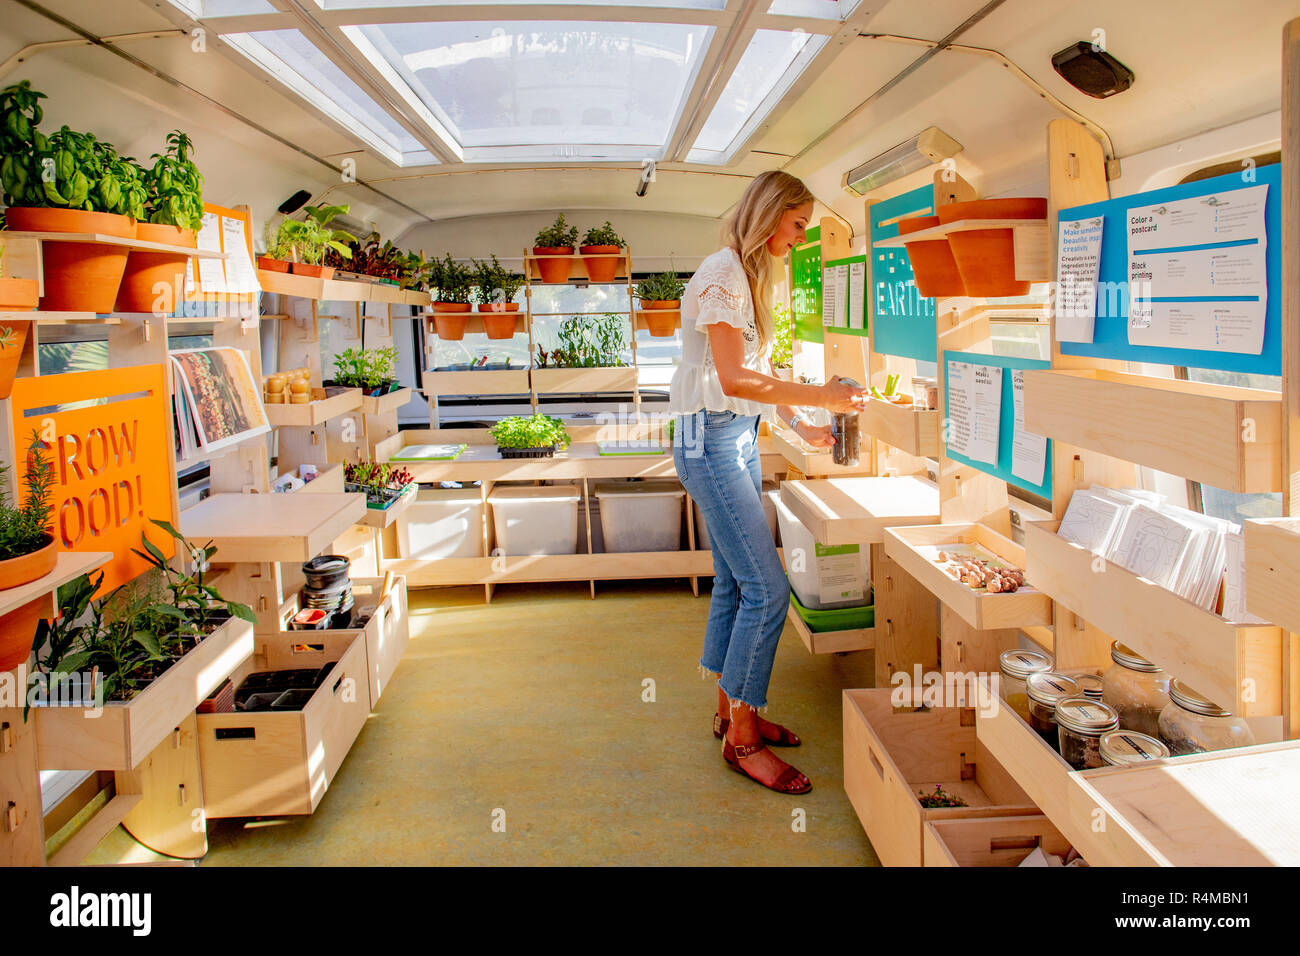 Kathryn Riordan organizes exhibits on the Ecology Bus second story Mobile Greenhouse. Stock Photo